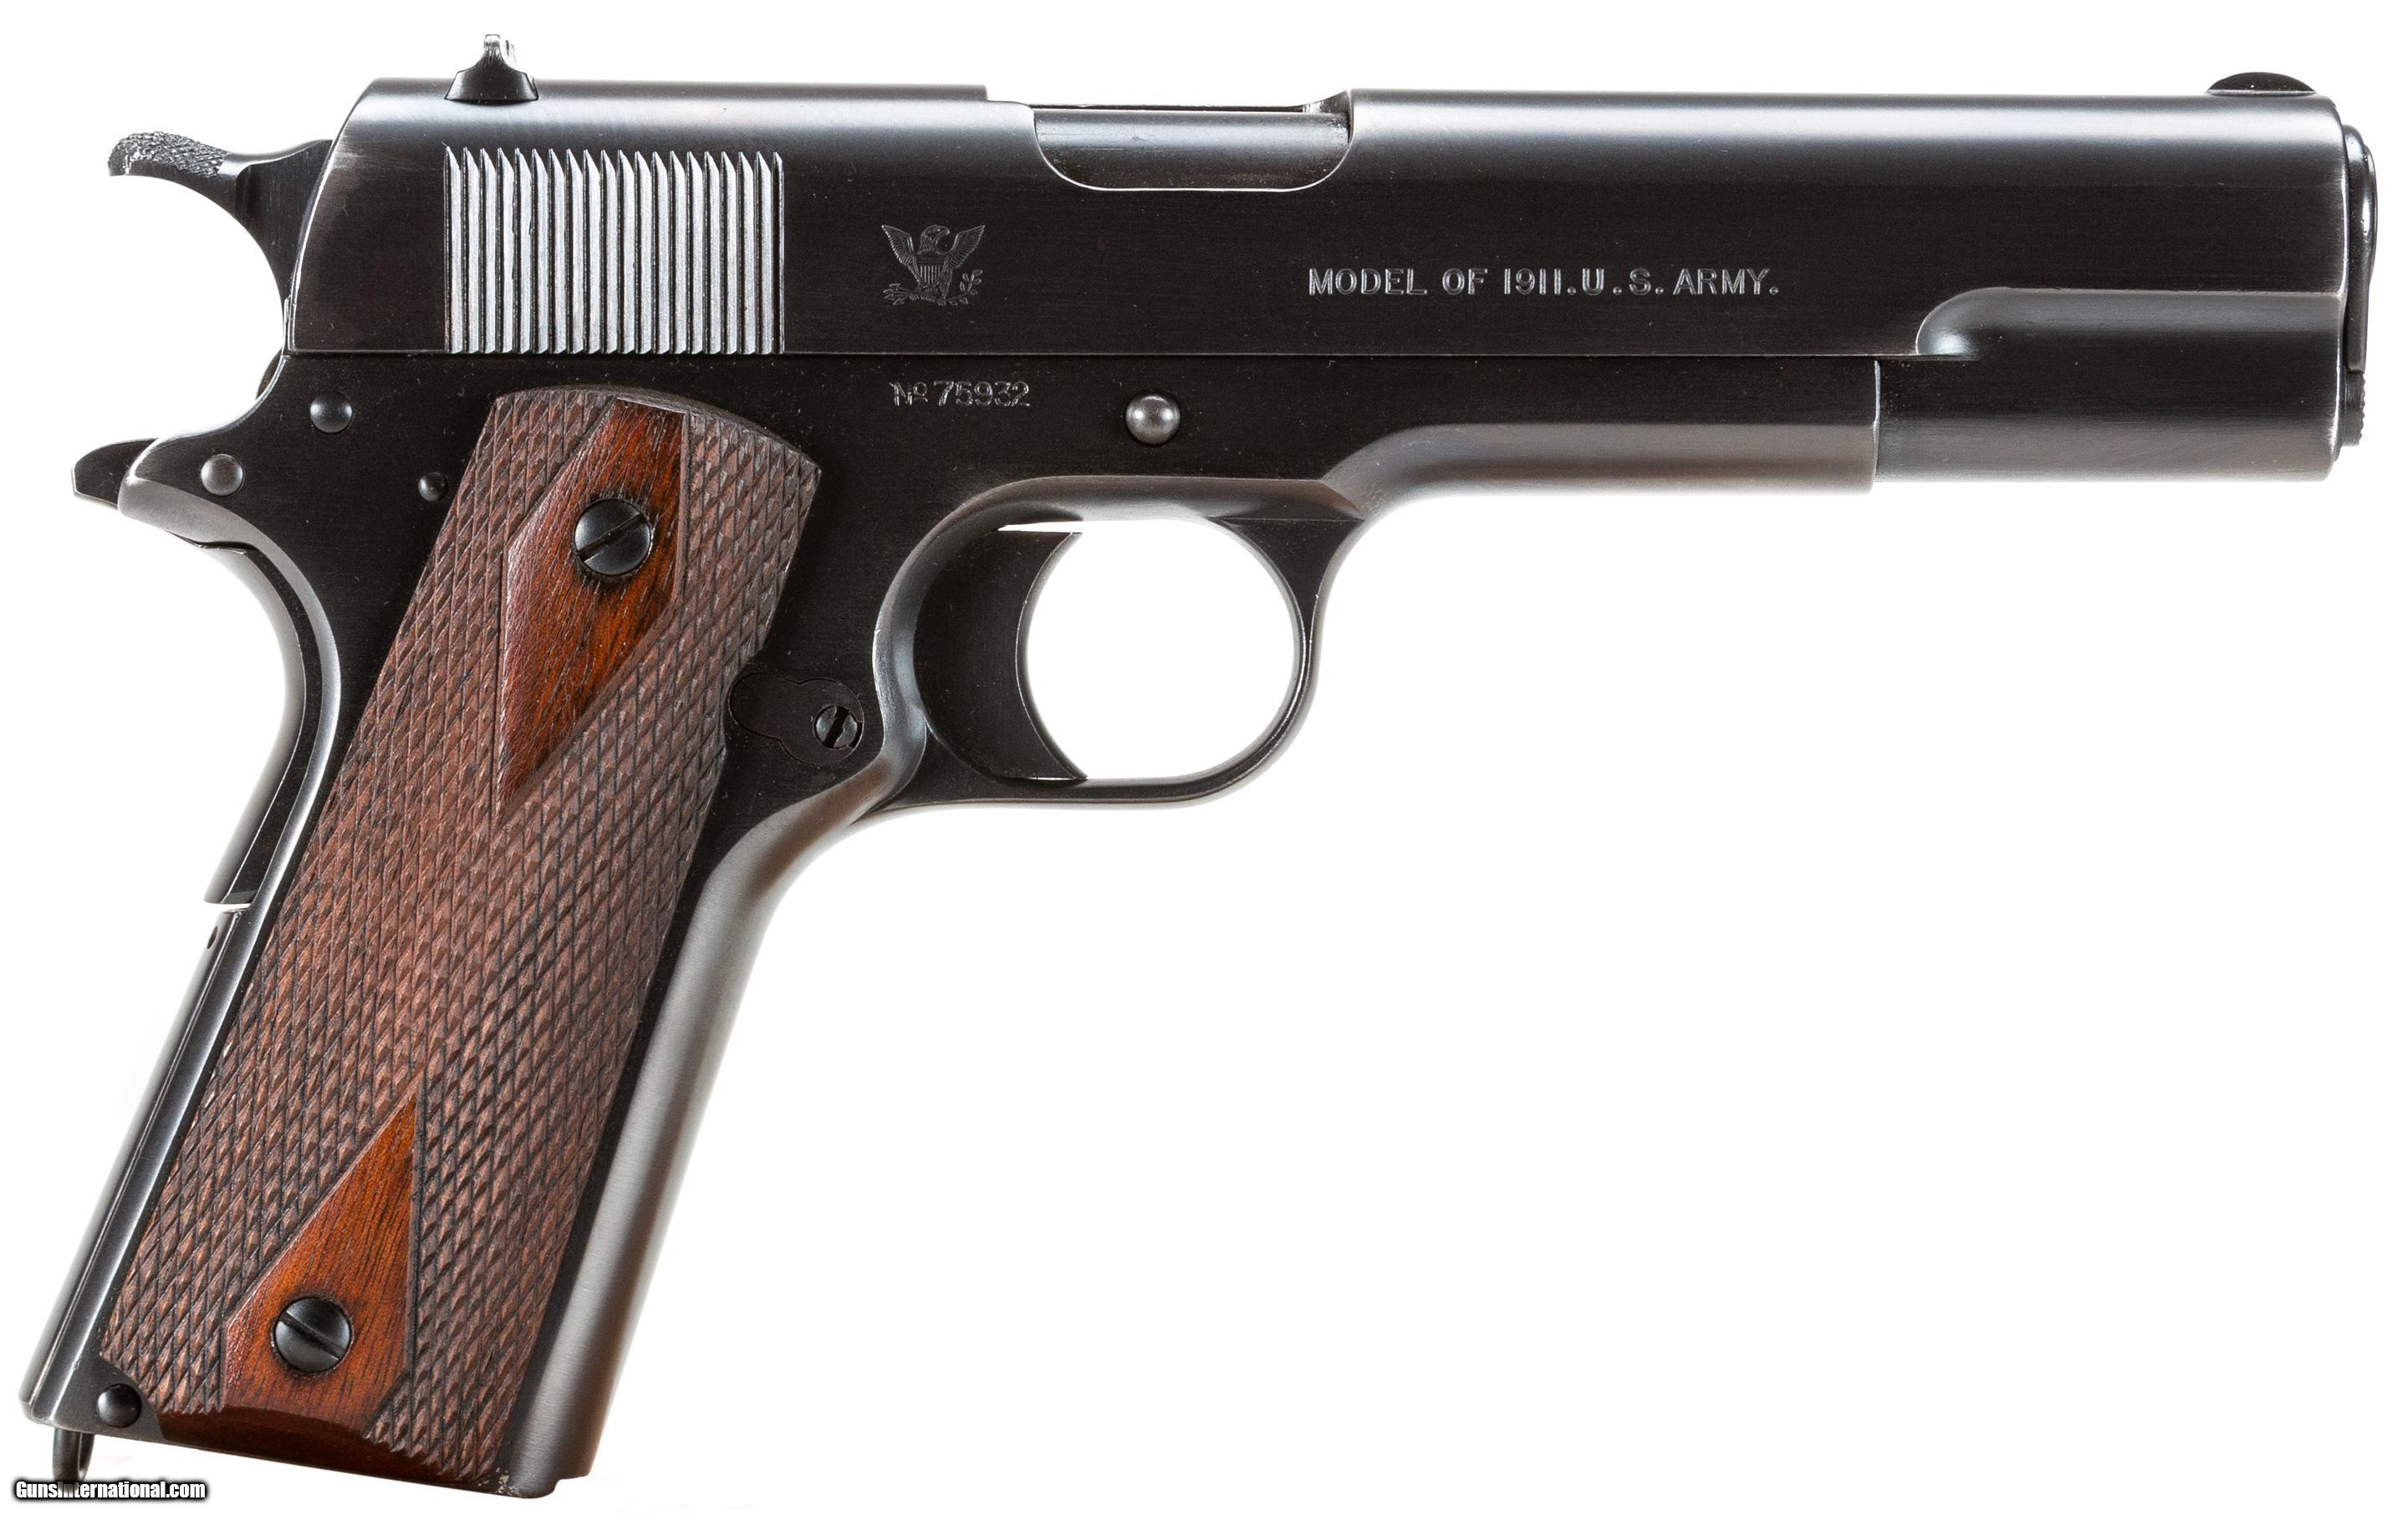 springfield armory serial numbers 1911